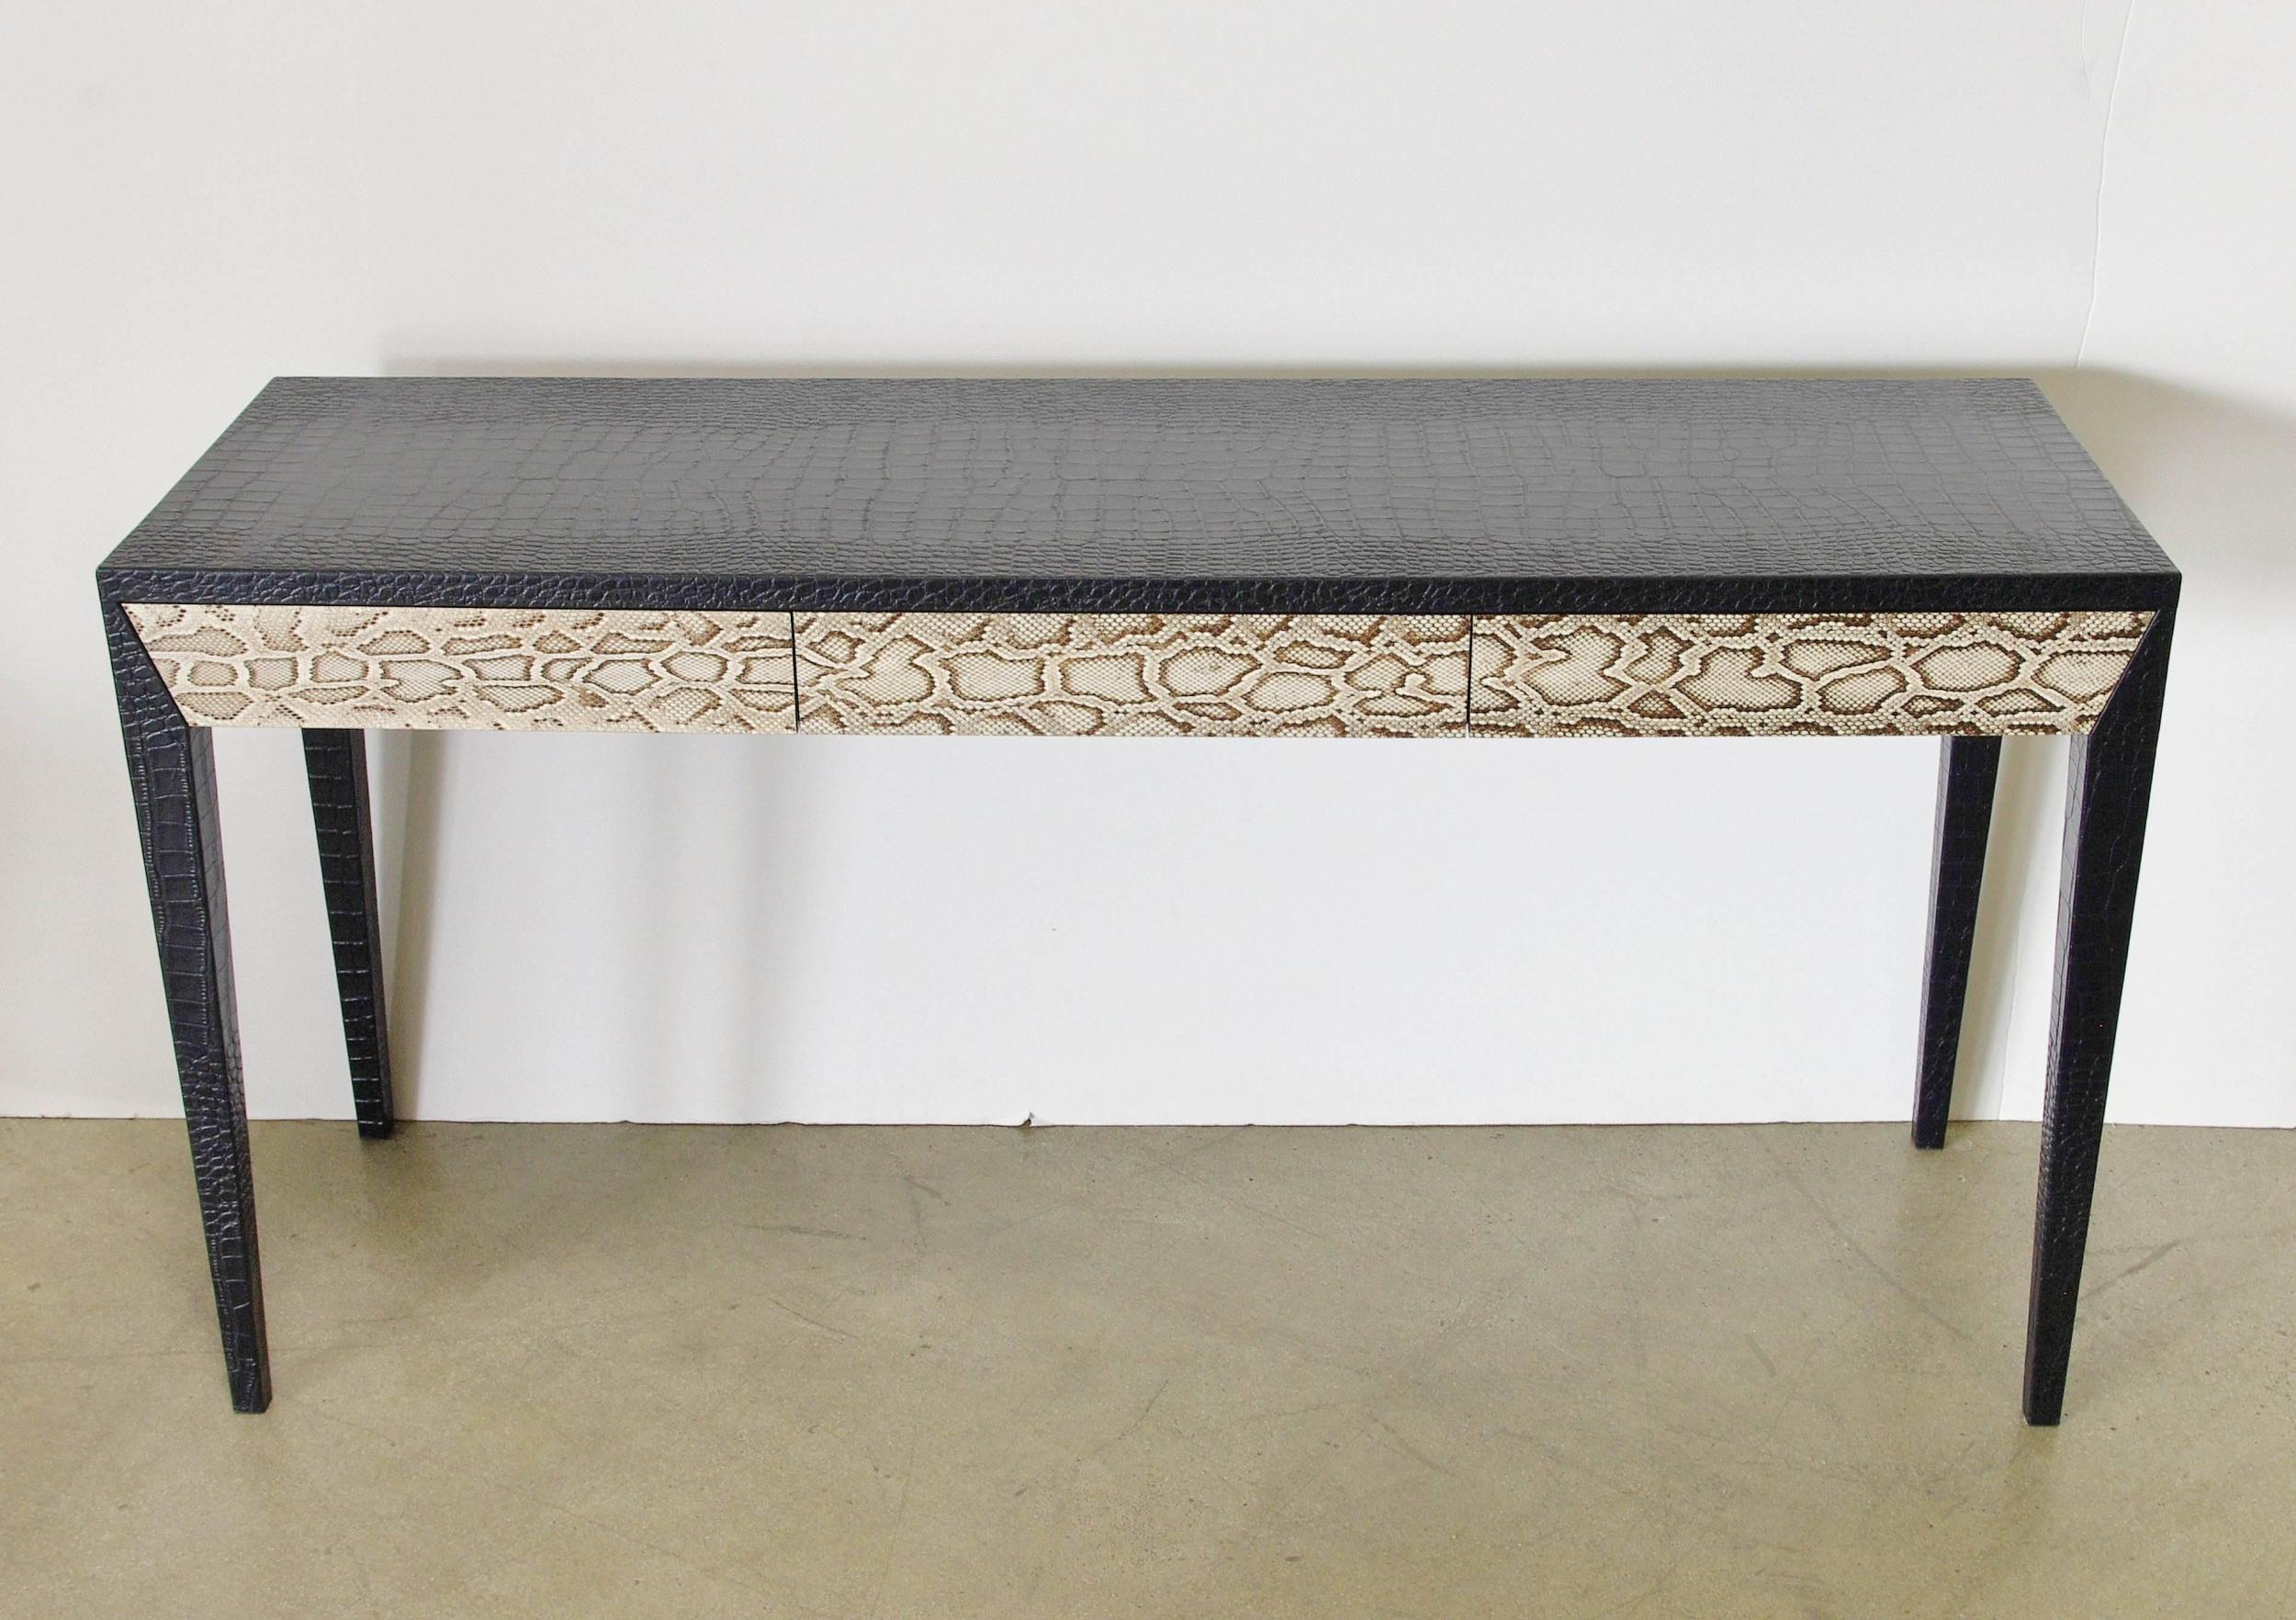 Chic Console Table w/ Black Leather & Snake Skin Attrib. to Karl Springer, 1970s For Sale 1